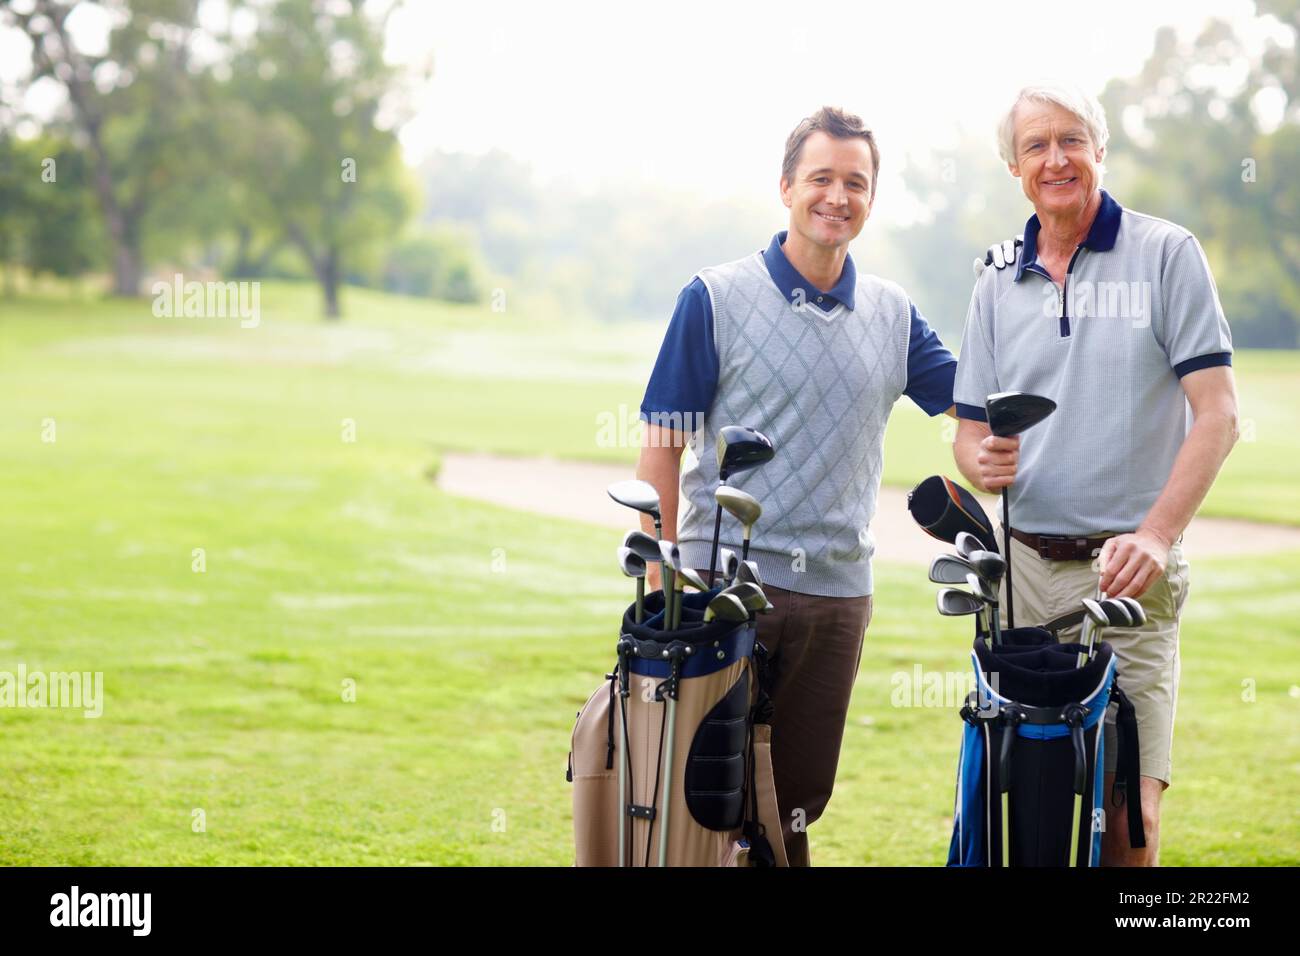 Father and son smiling on golf course. Portrait of father and son standing with golf bags and smiling. Stock Photo